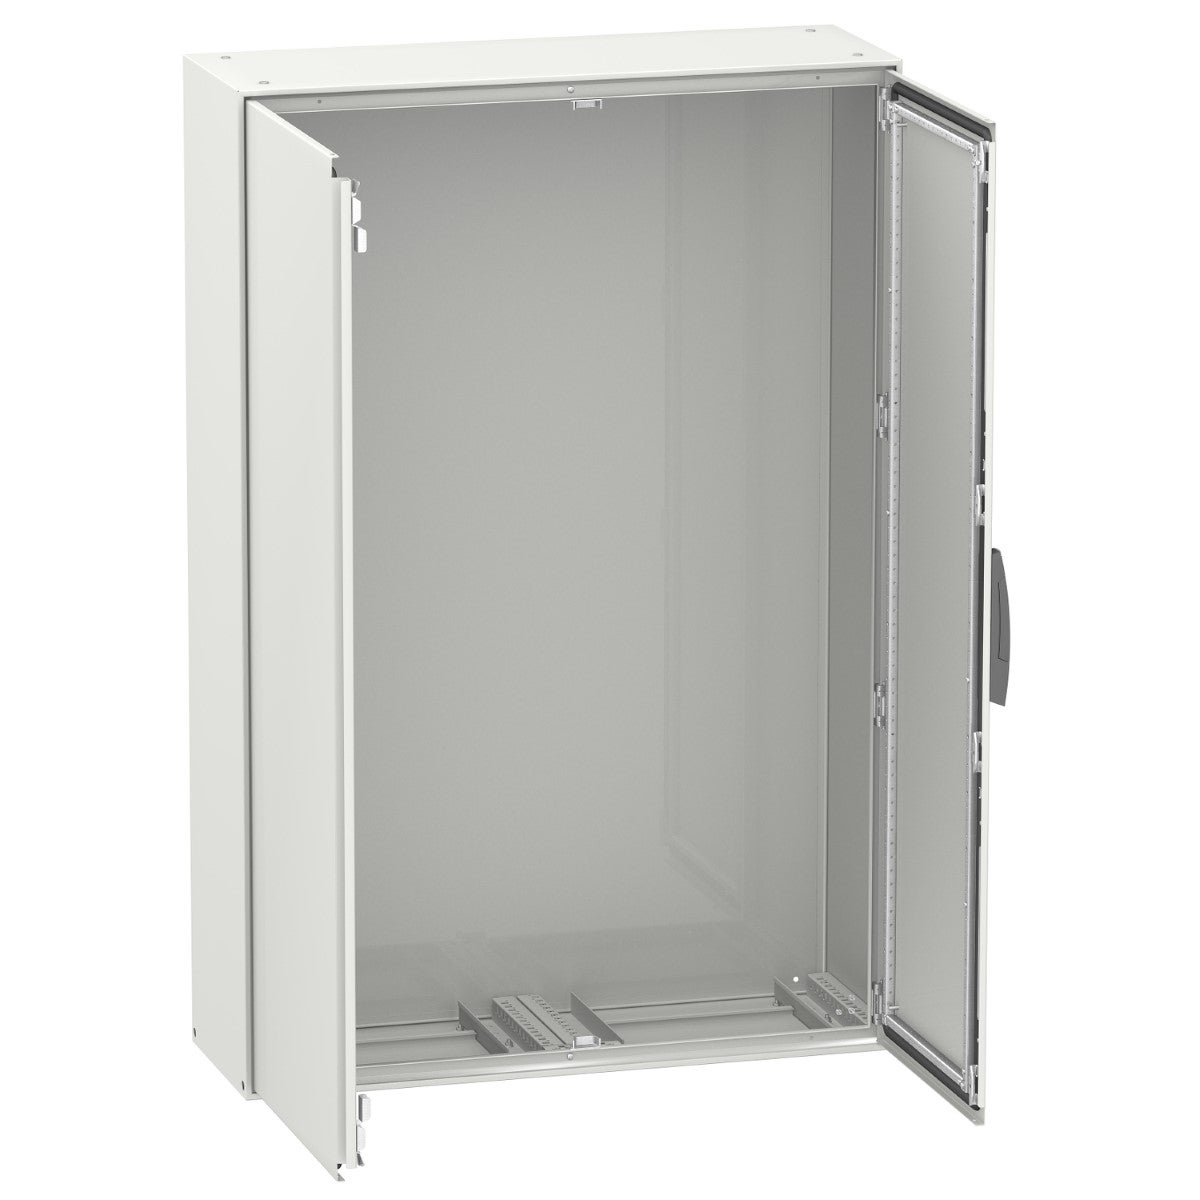 Spacial SM compact enclosure without mounting plate - 2000x1600x500 mm